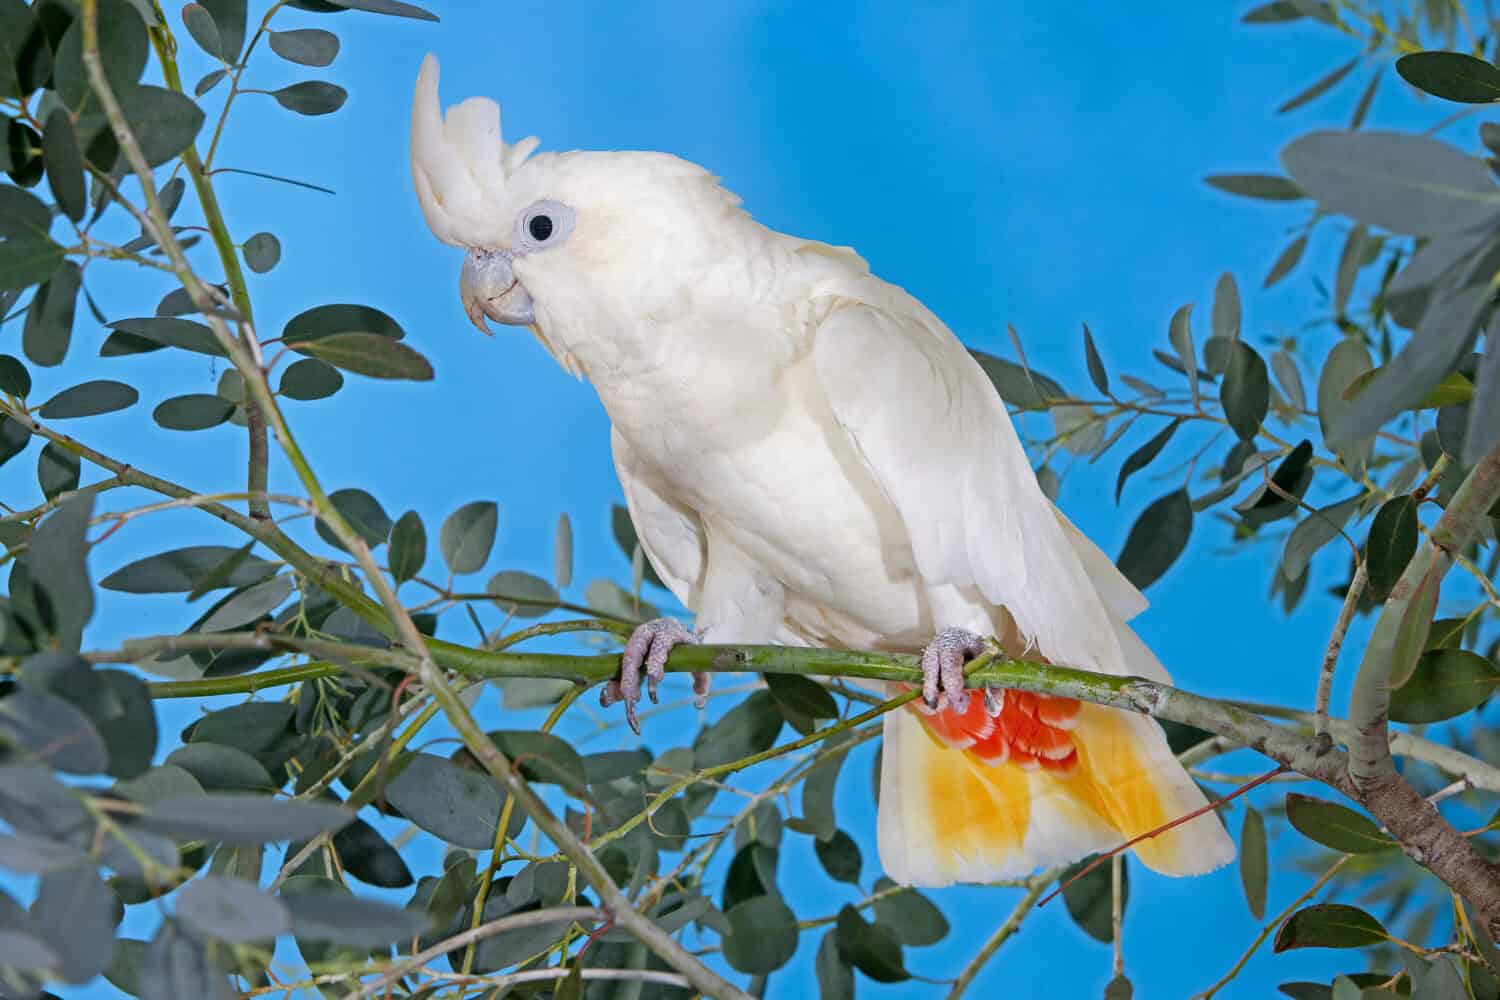 PHILIPPINE COCKATOO OR RED-VENTED COCKATOO cacatua haematuropygia, ADULT STANDING ON BRANCH  